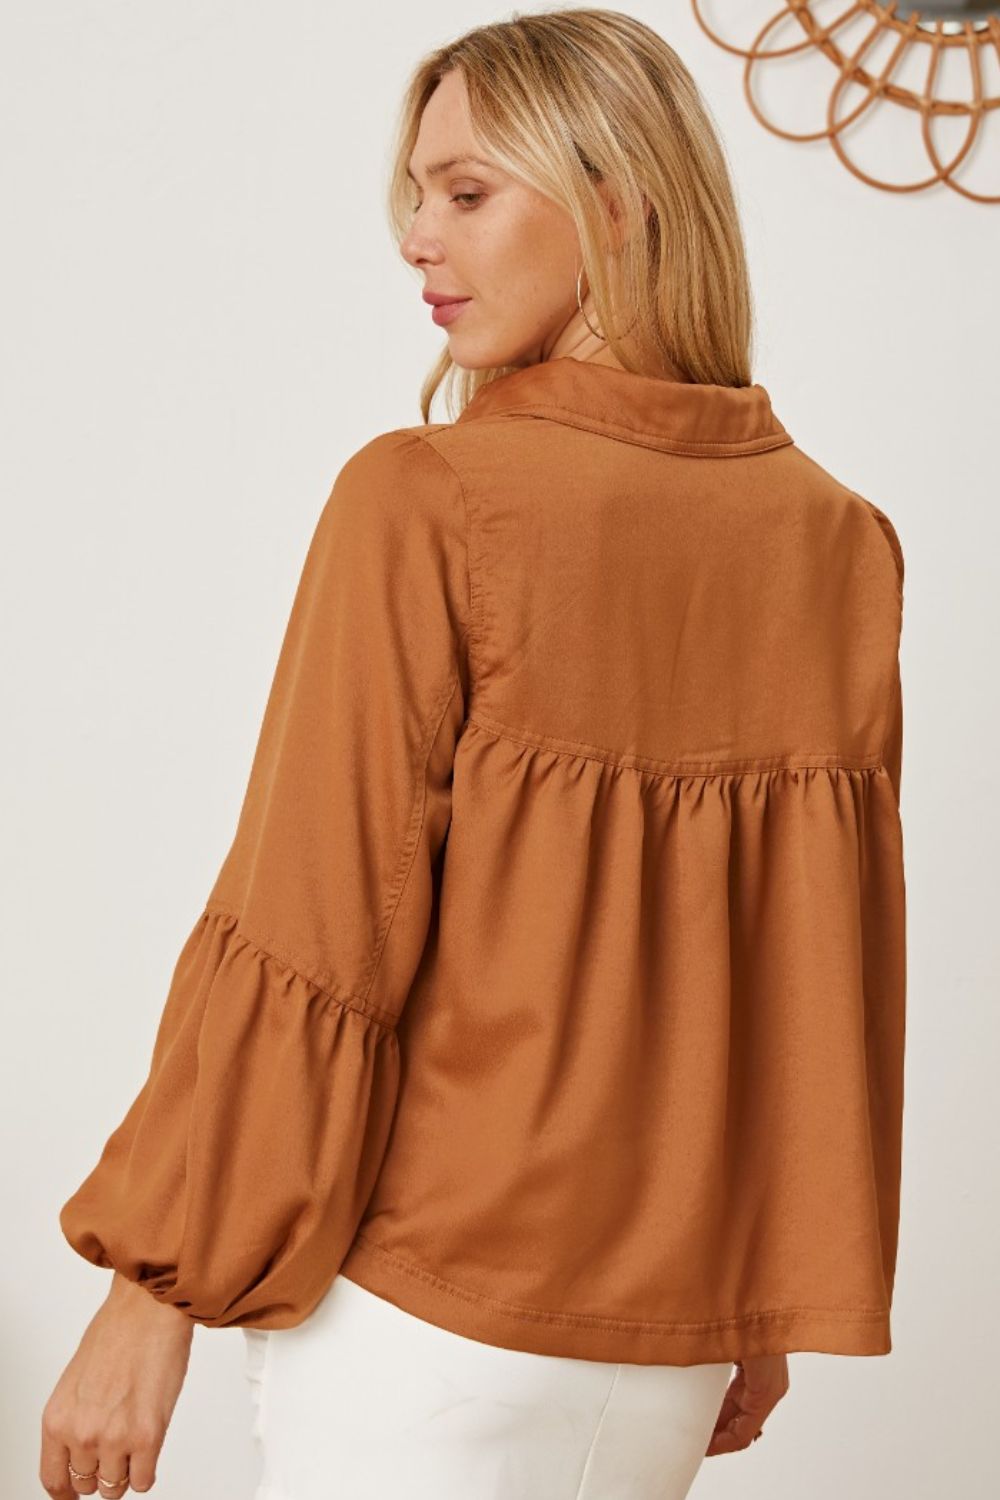 Balloon Sleeve Collared Neck Blouse - Women’s Clothing & Accessories - Shirts & Tops - 4 - 2024